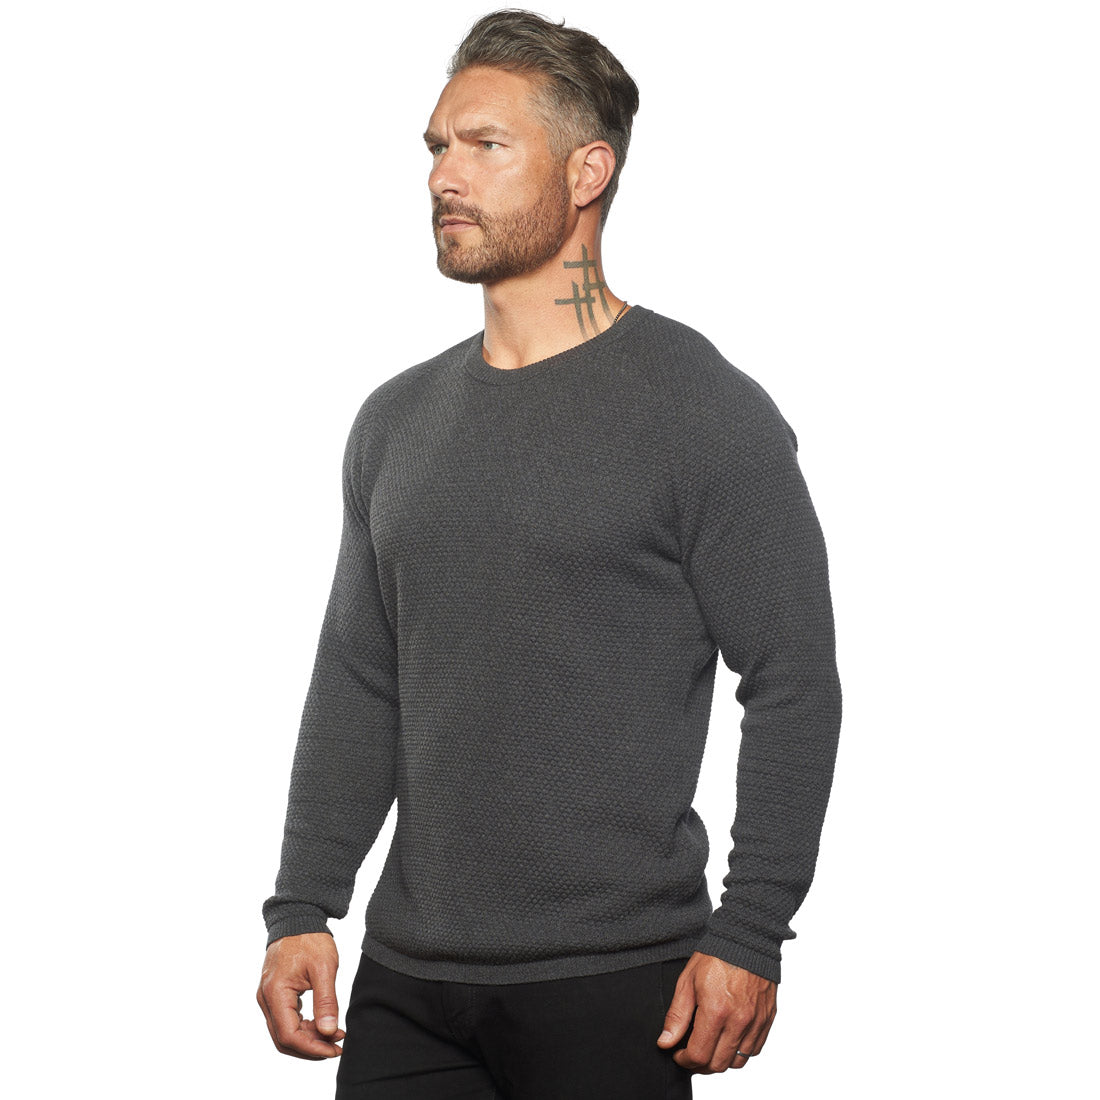 The Ripley Crew Neck Cotton & Cashmere FITTED Sweater